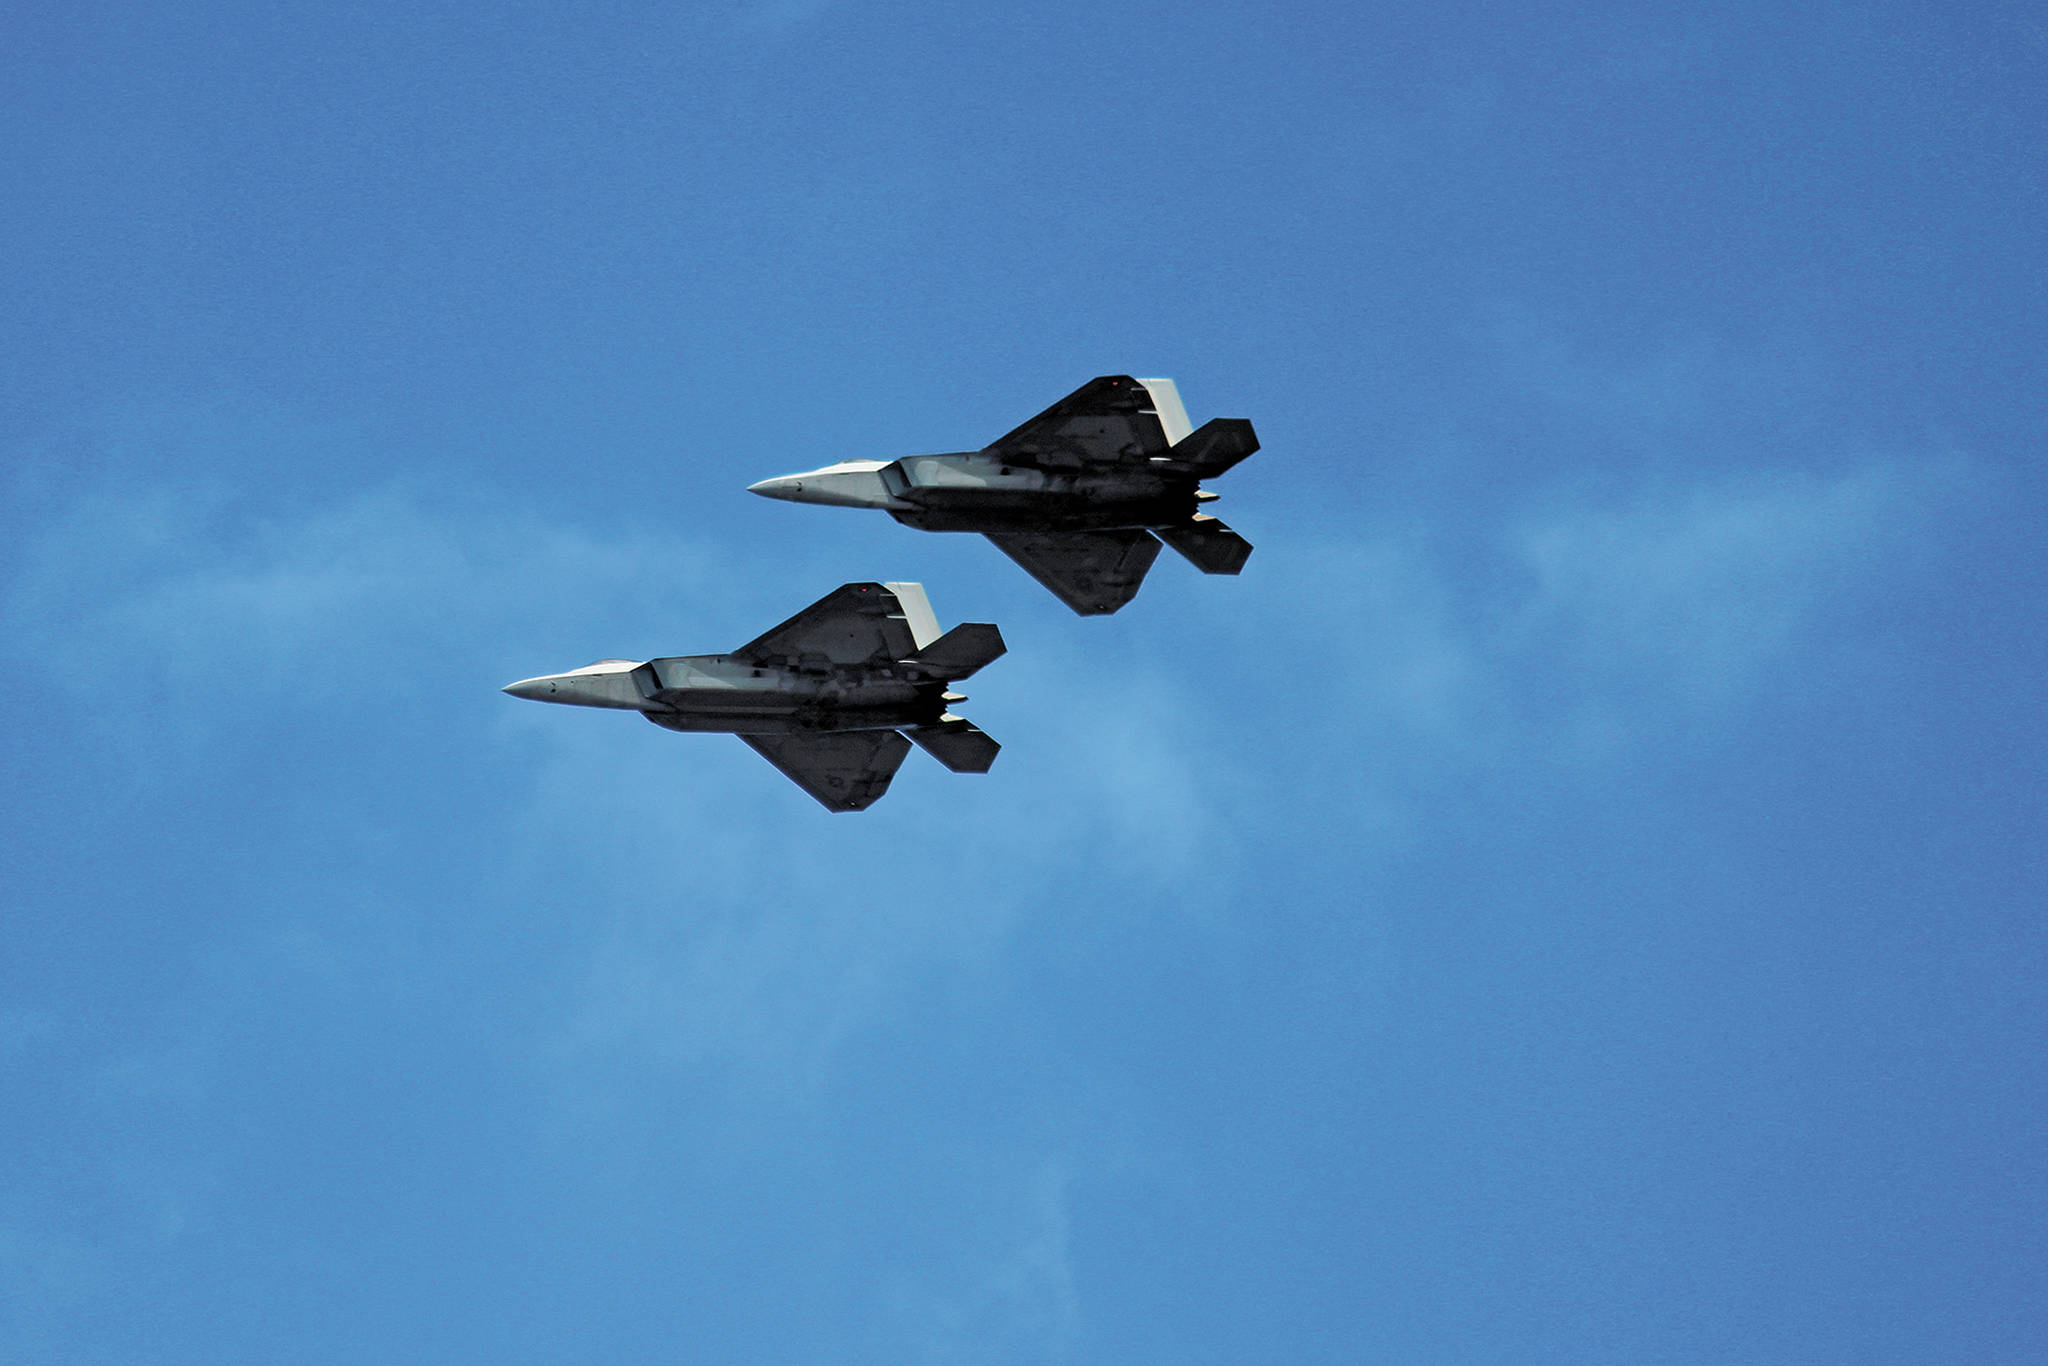 Two F-22s fly over Beluga Lake on Friday, May 15, 2020 as part of a statewide flyover event put on by the U.S. Air Force and Air National Guard. Four of the aircraft flew over Homer, Alaska and other parts of the state as a way to show support for health care workers and other COVID-19 front line workers. (Photo by Megan Pacer/Homer News)